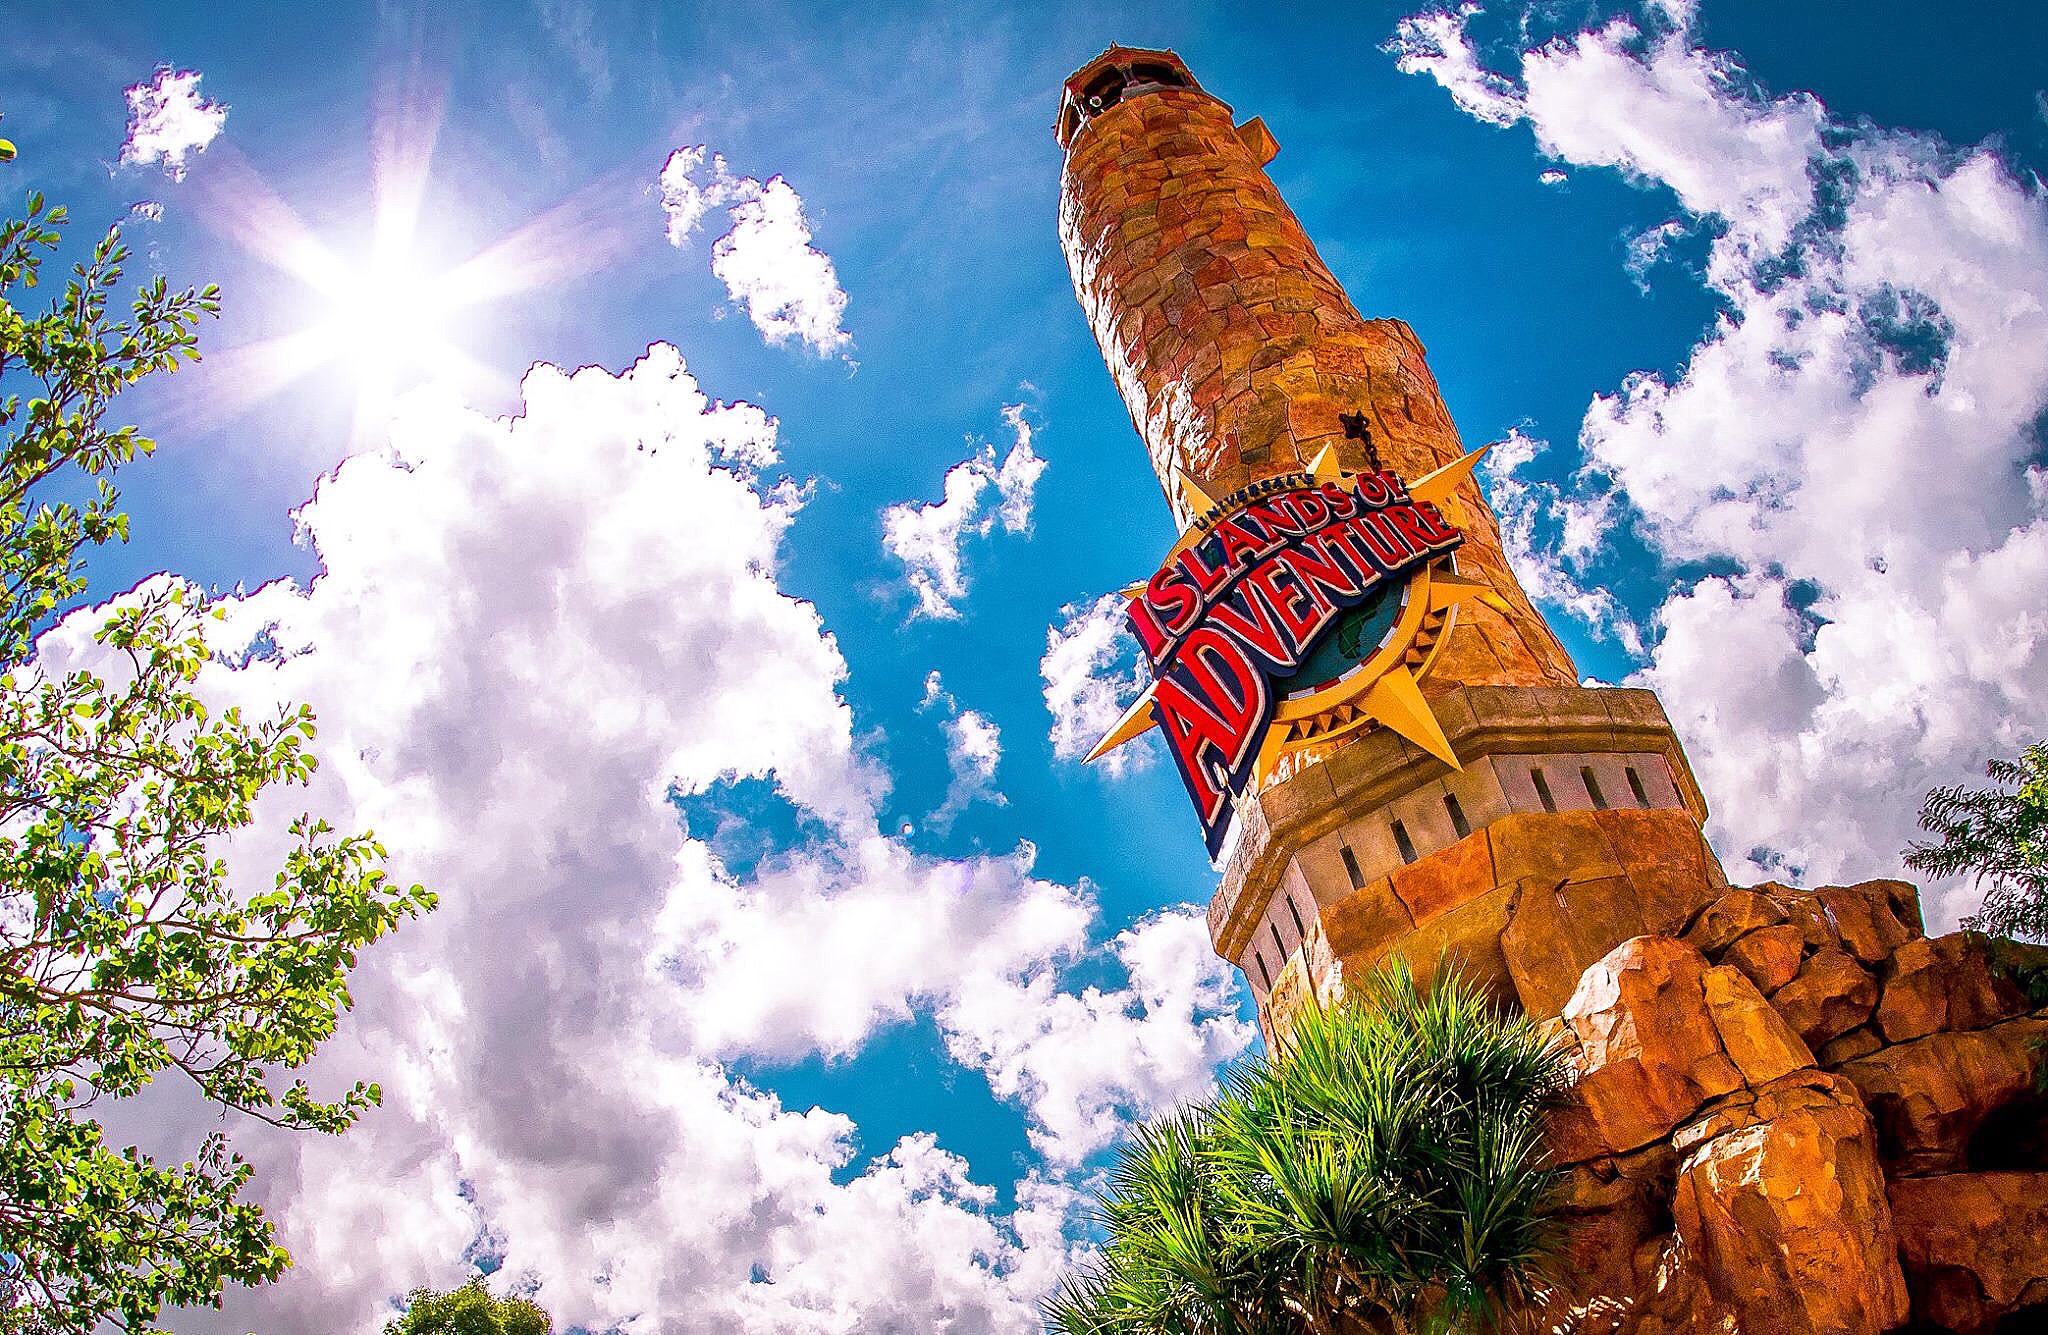 Islands of Adventure's 20th Anniversary — Looking at Our Reader's